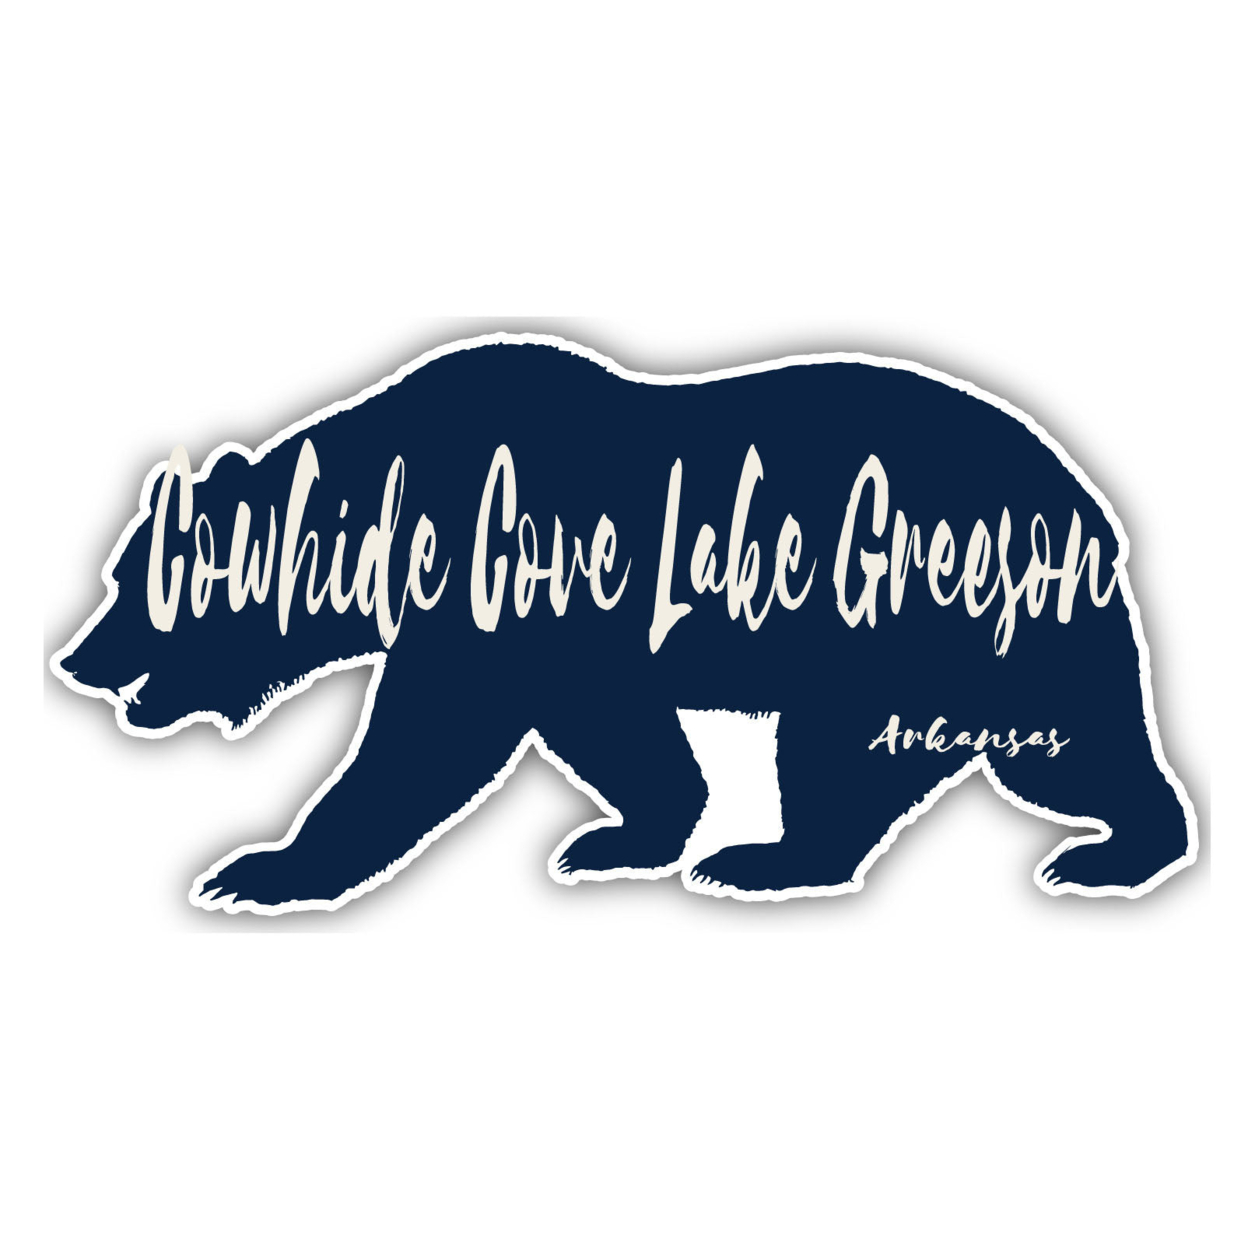 Cowhide Cove Lake Greeson Arkansas Souvenir Decorative Stickers (Choose Theme And Size) - 4-Pack, 8-Inch, Camp Life